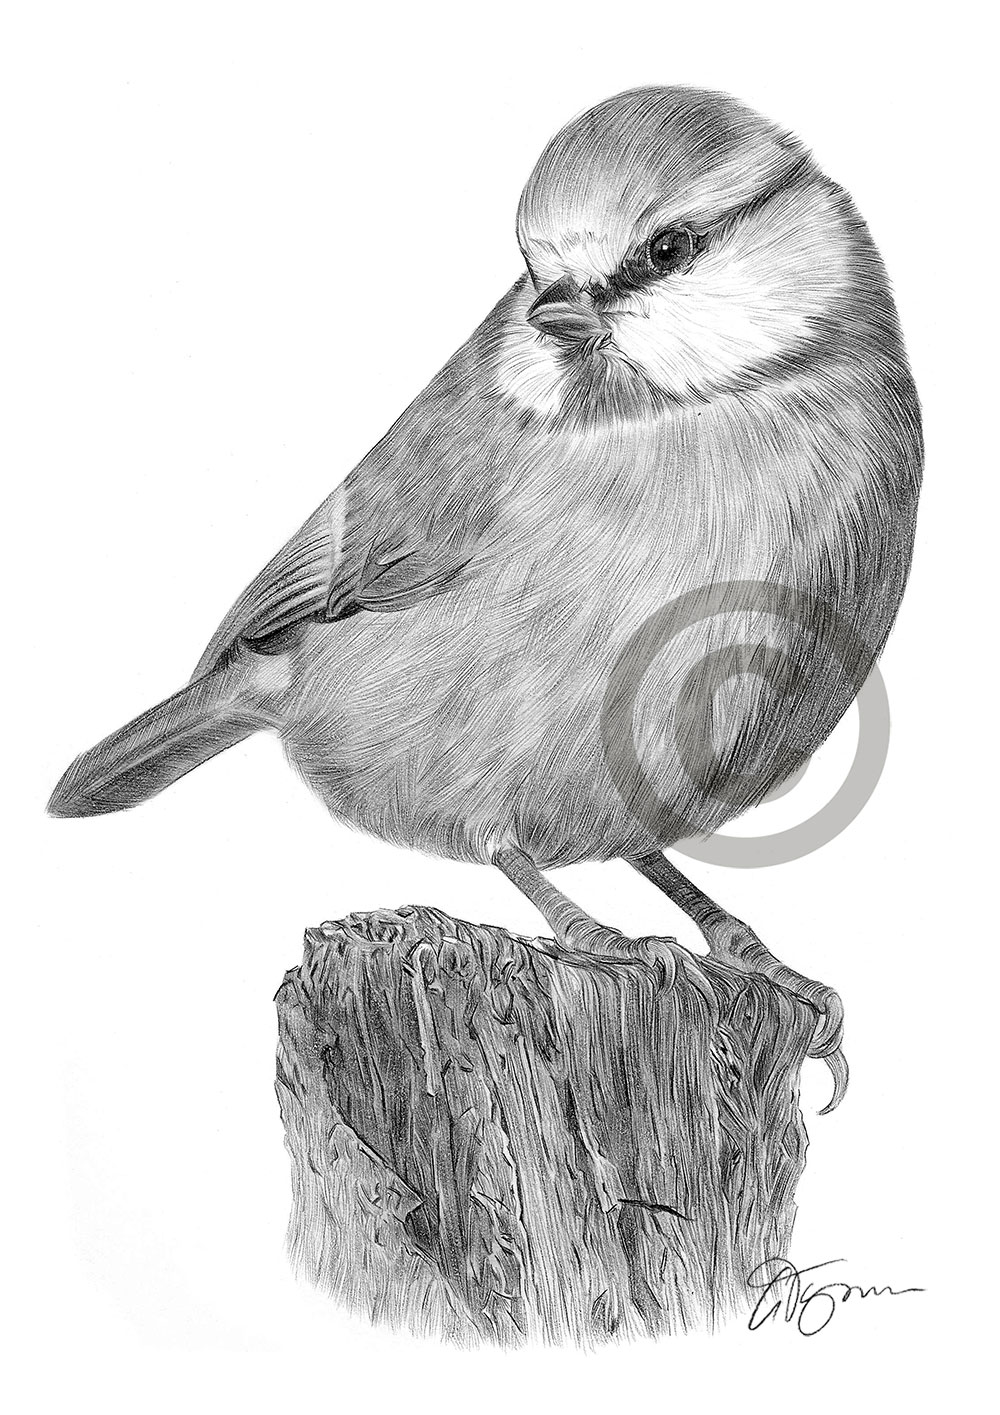 Pencil drawing of a blue tit by artist Gary Tymon